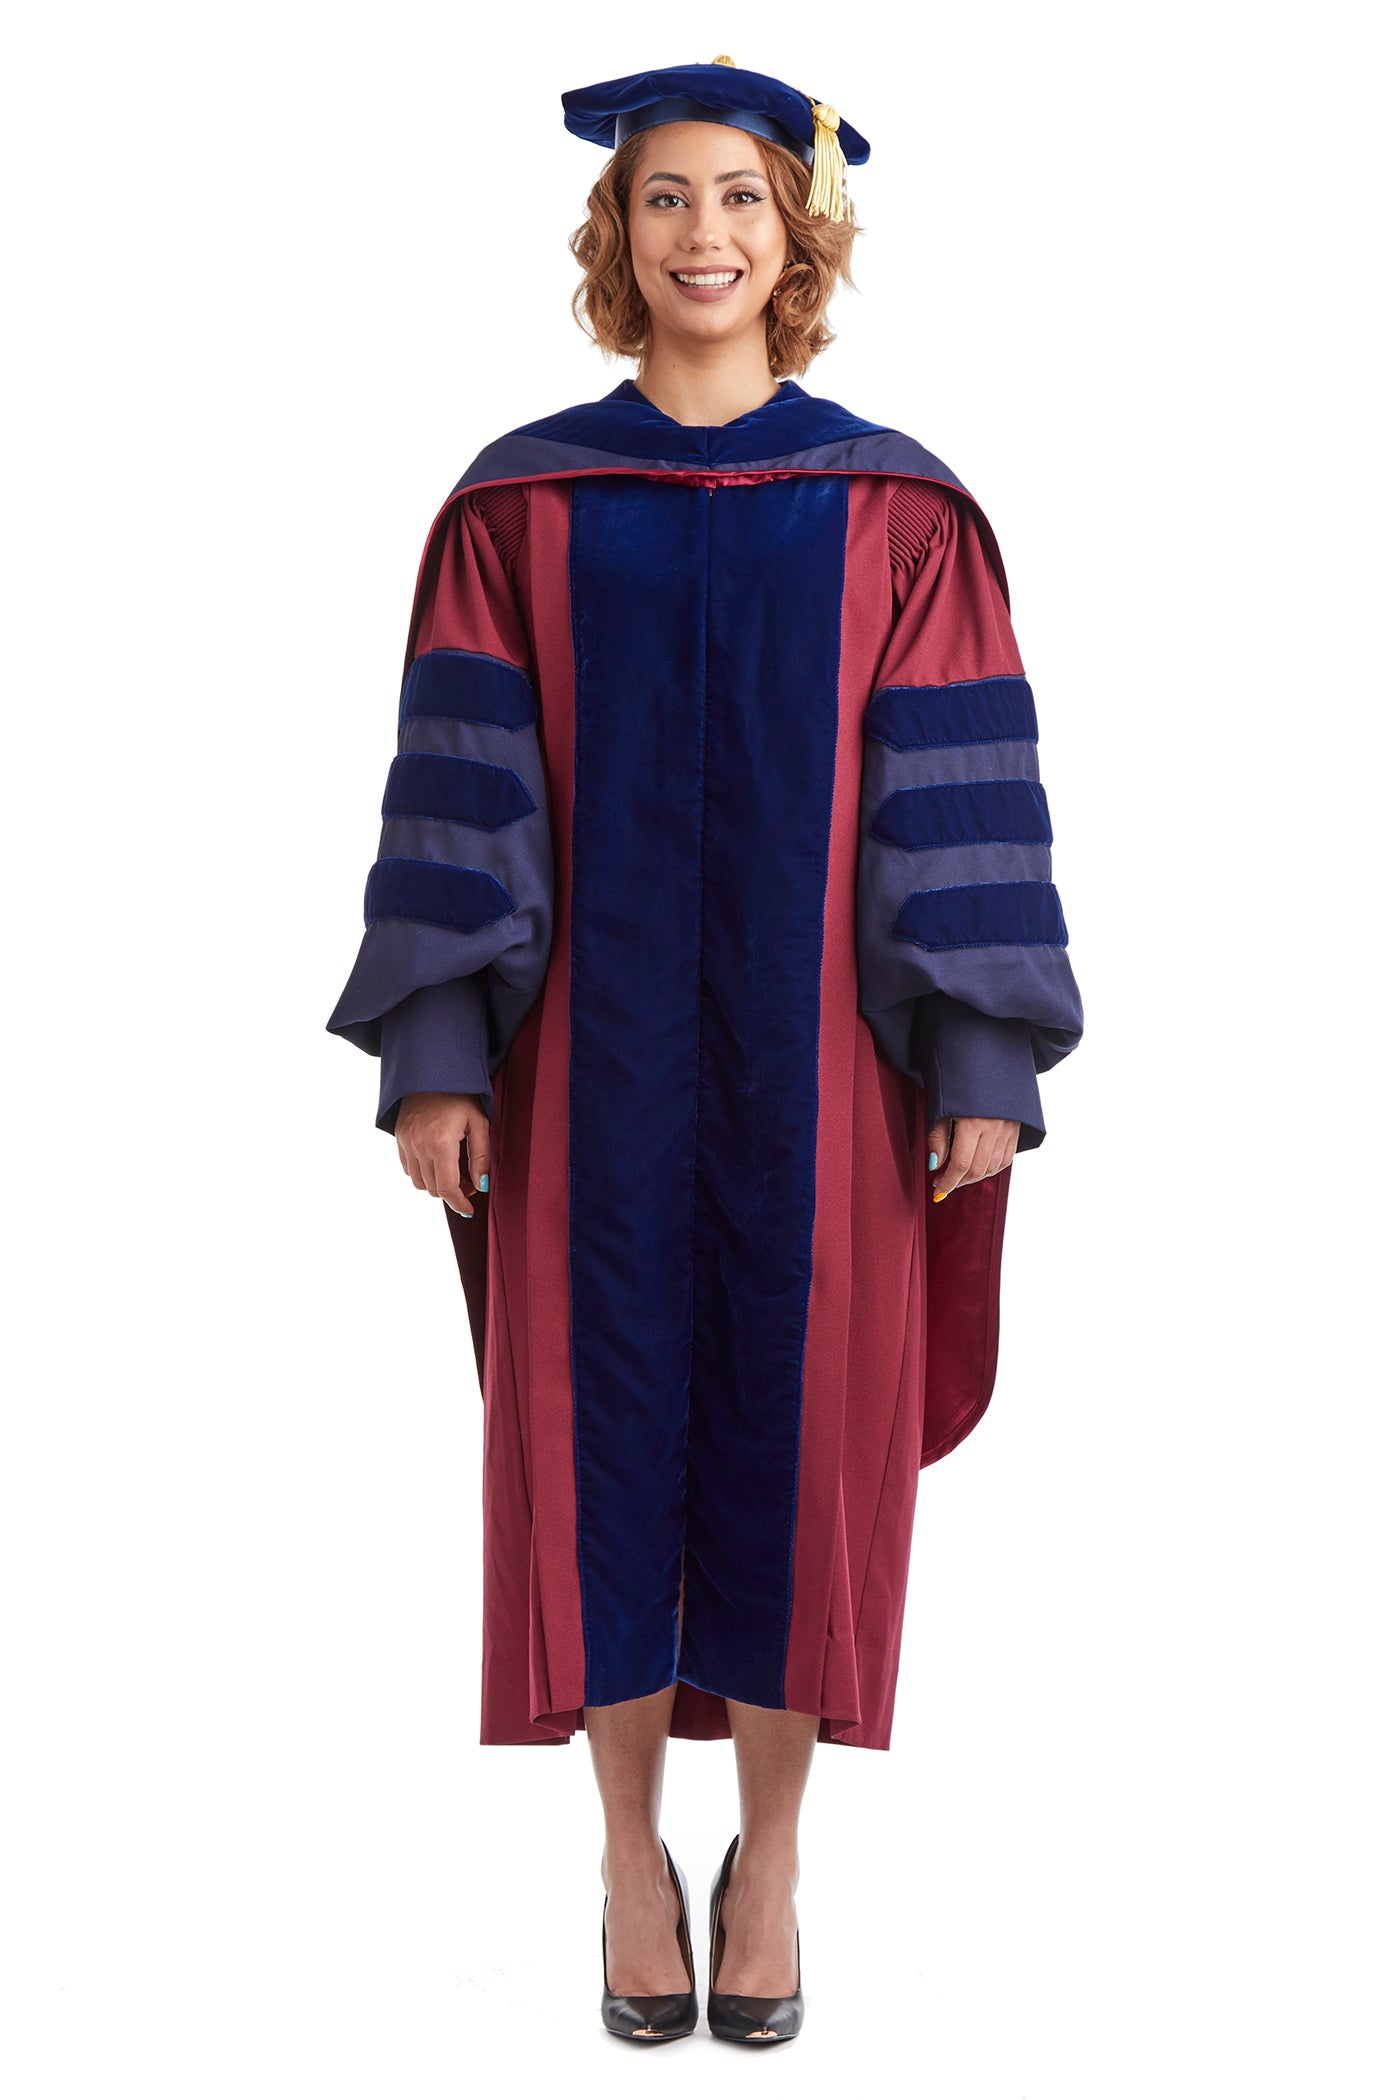 University of Pennsylvania PhD Regalia Set. Doctoral Gown, Hood, and Eight Sided Doctoral Tam with Tassel